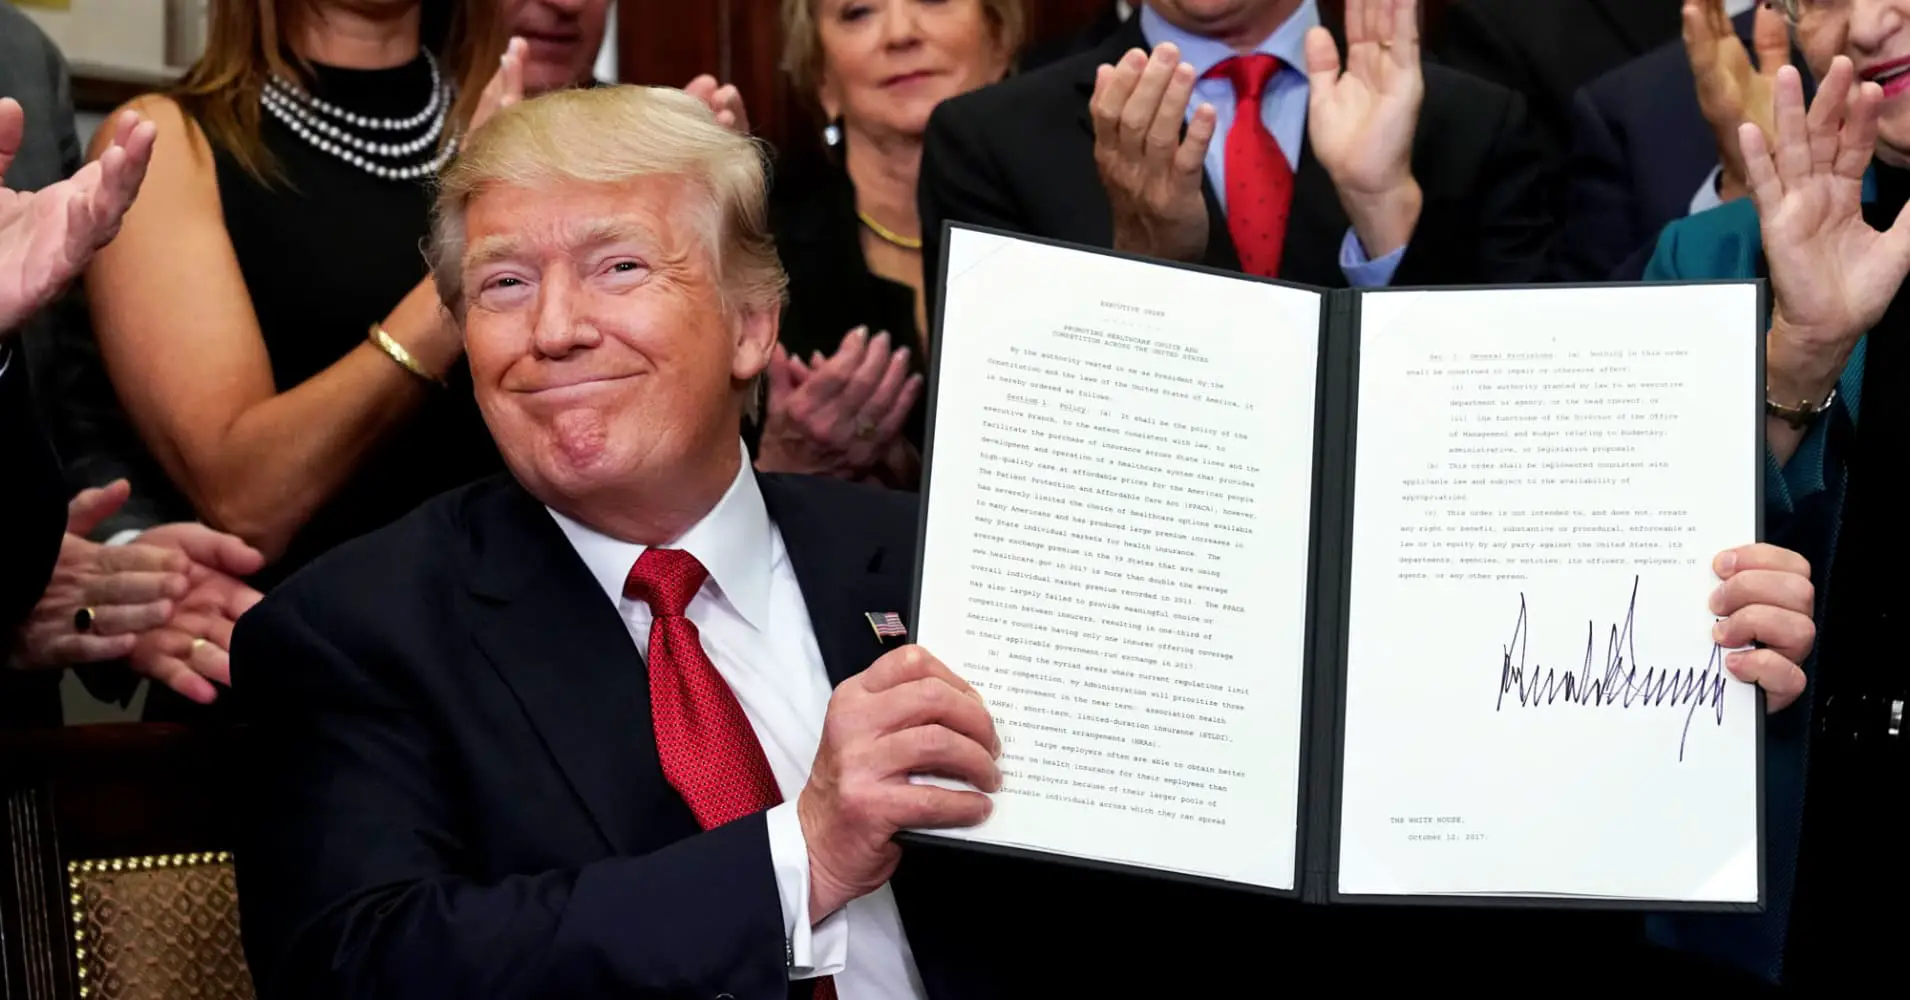 Trump Obamacare order shows he doesn